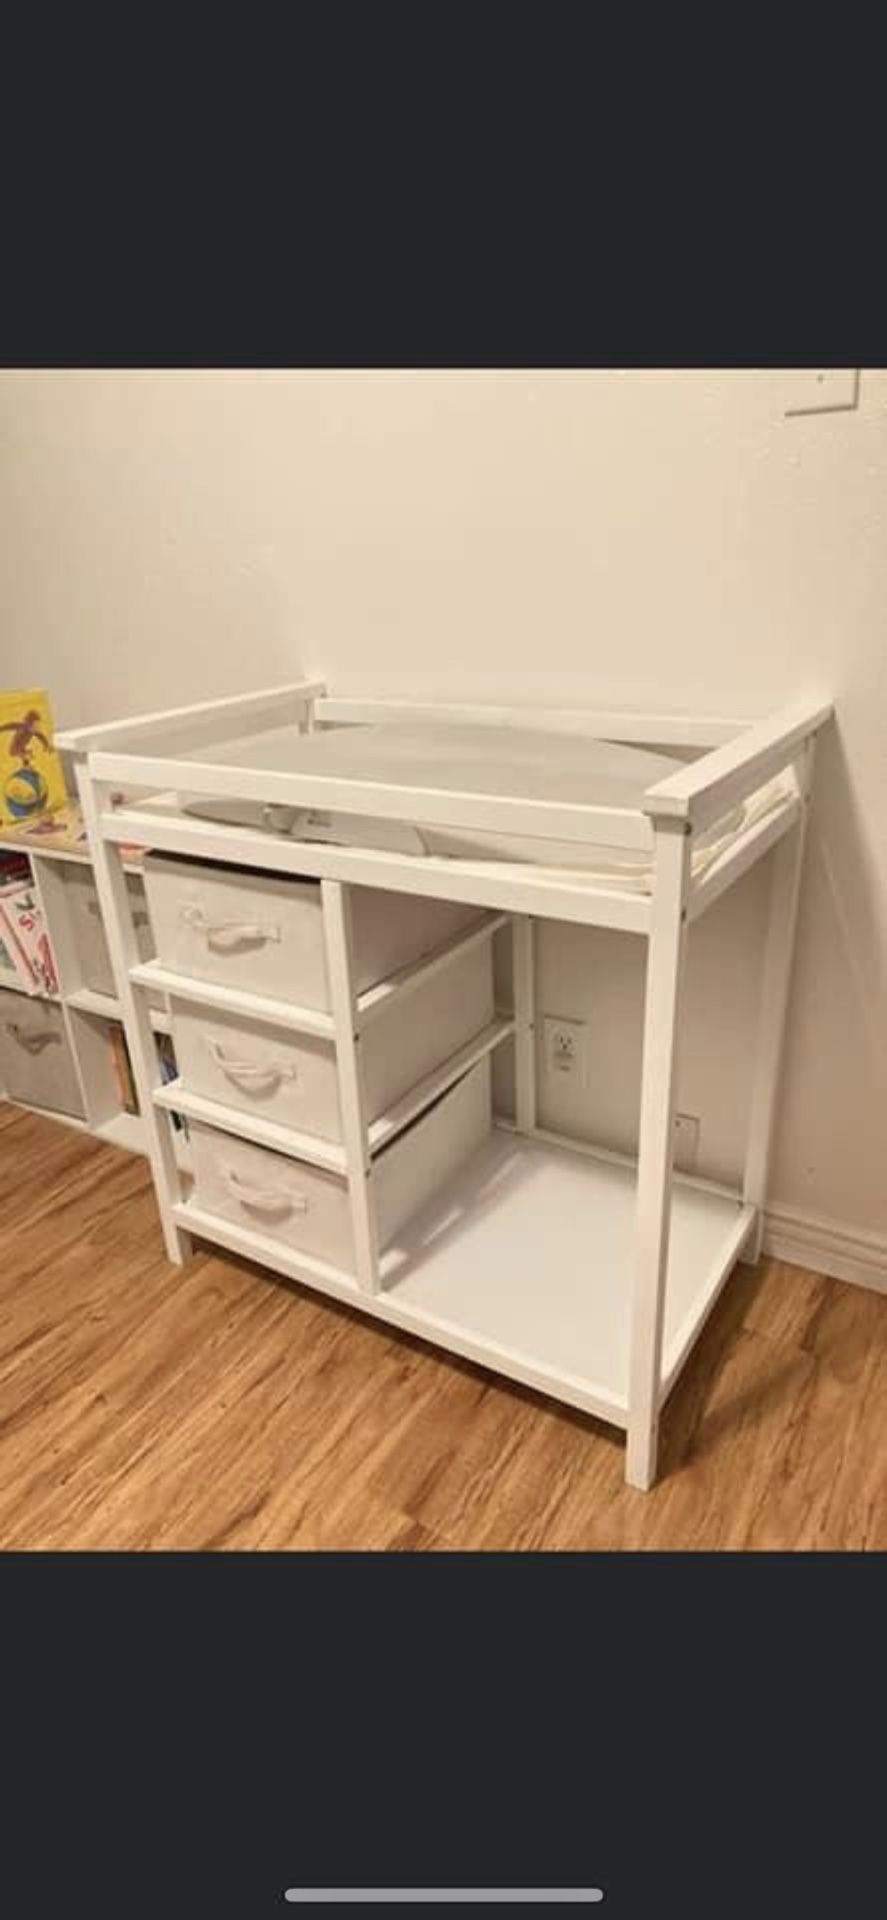 Free Changing Table 